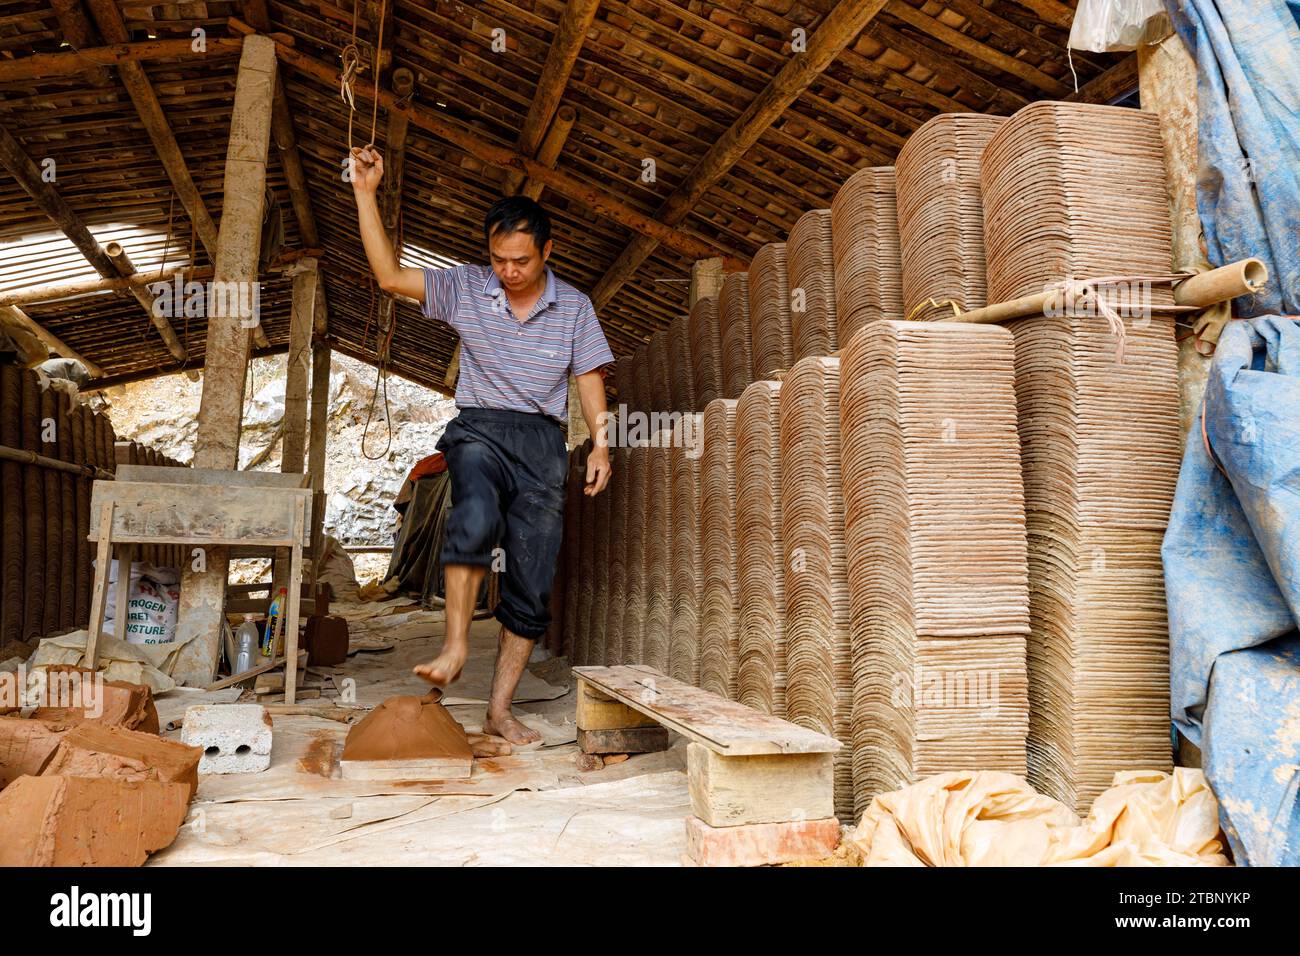 Tiles are handmade in Bac Son in Vietnam Stock Photo